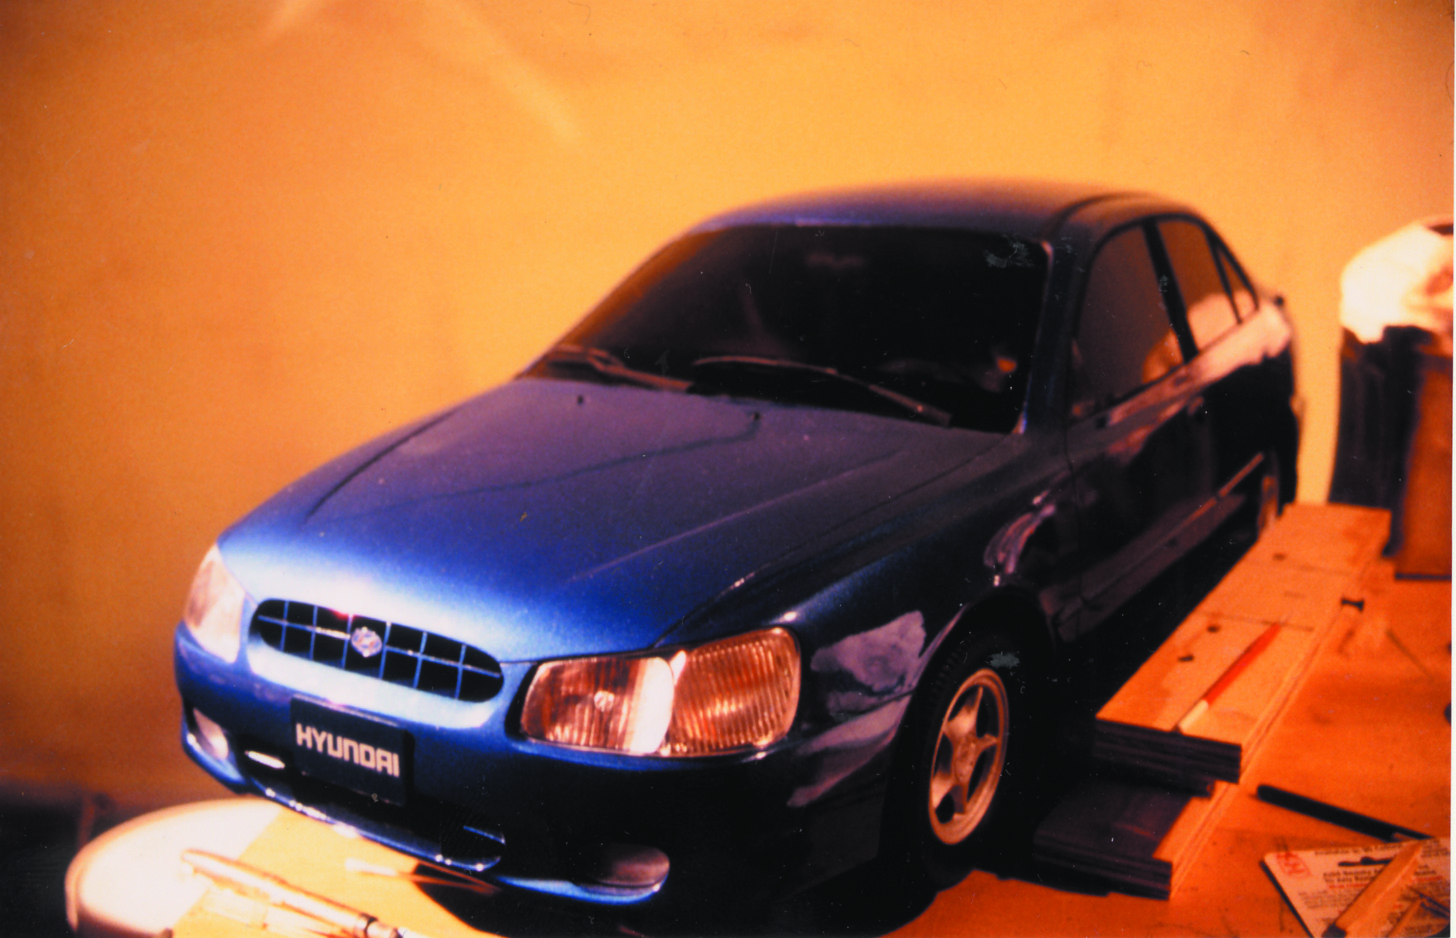 1/7 scale vehicle Hyundai commercial